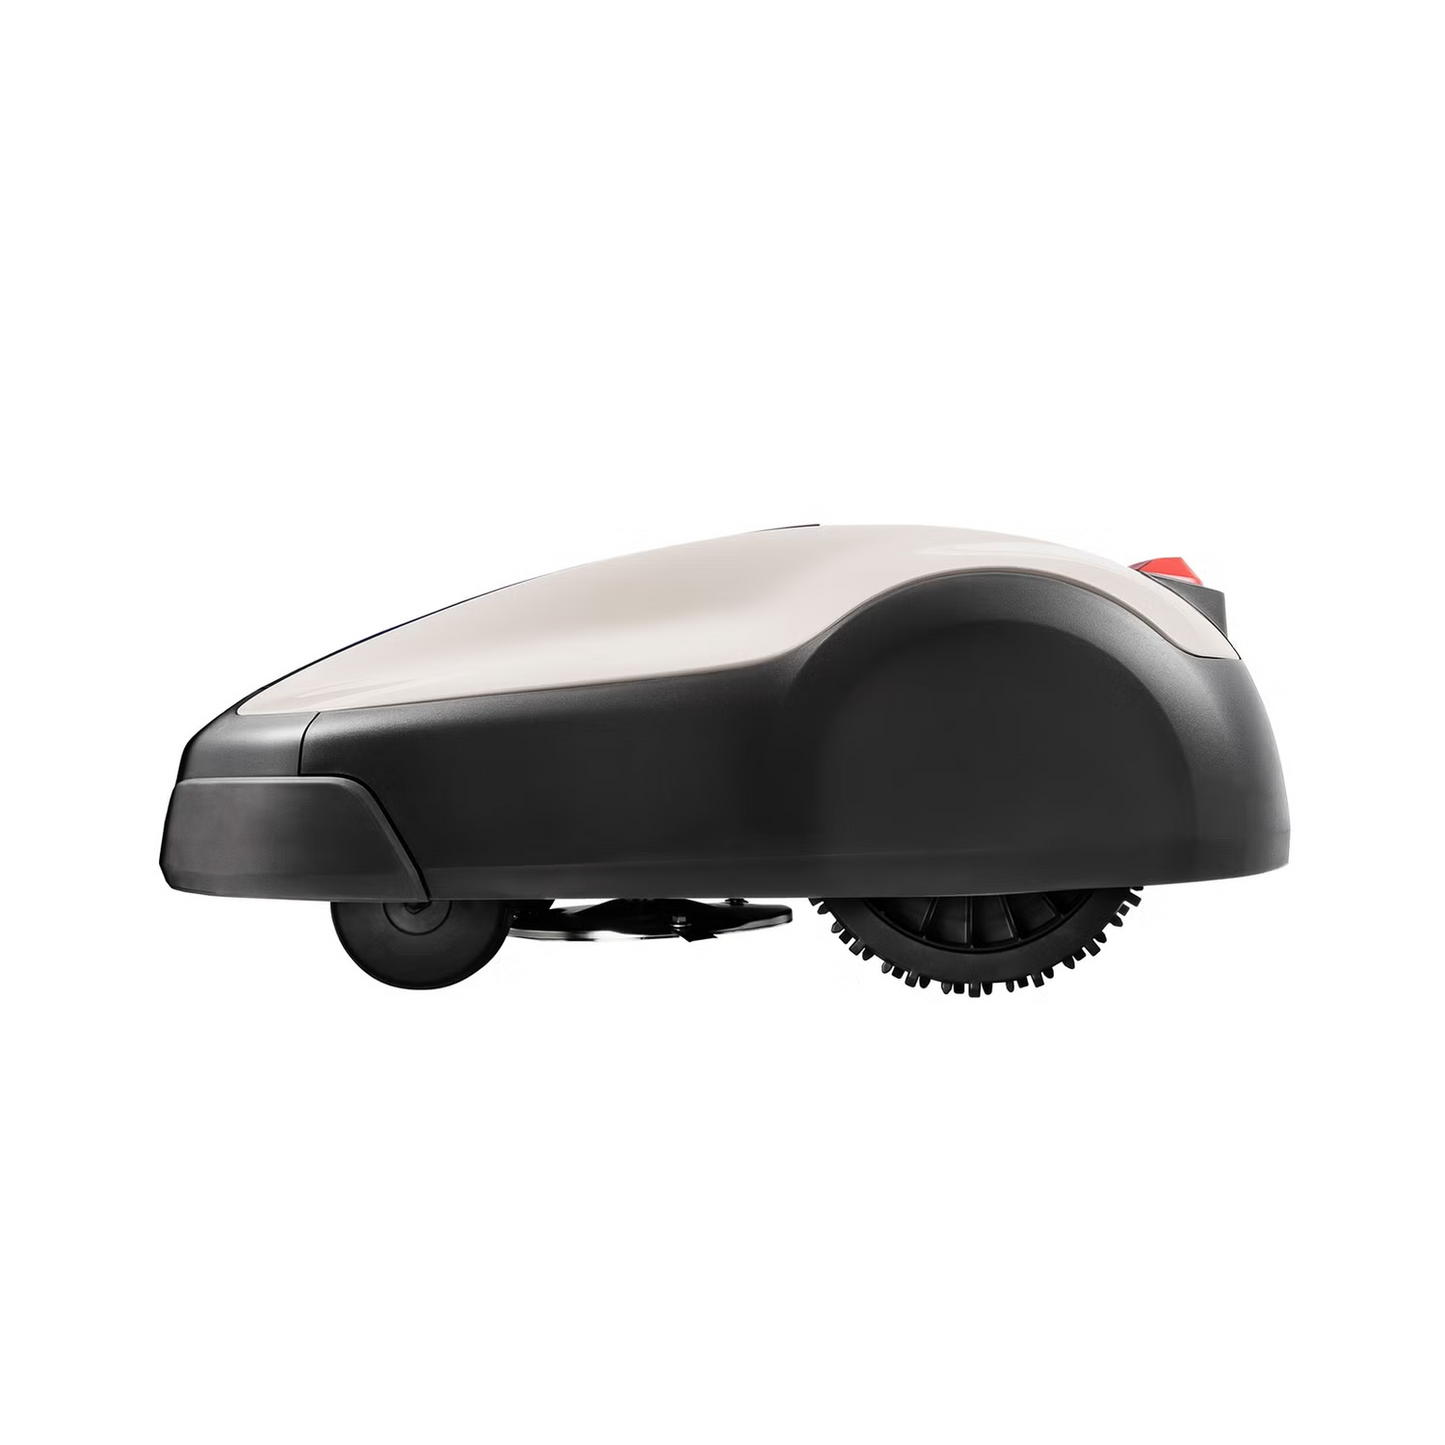 Honda Miimo 2500 Robotic Lawnmower with Wire and Pegs